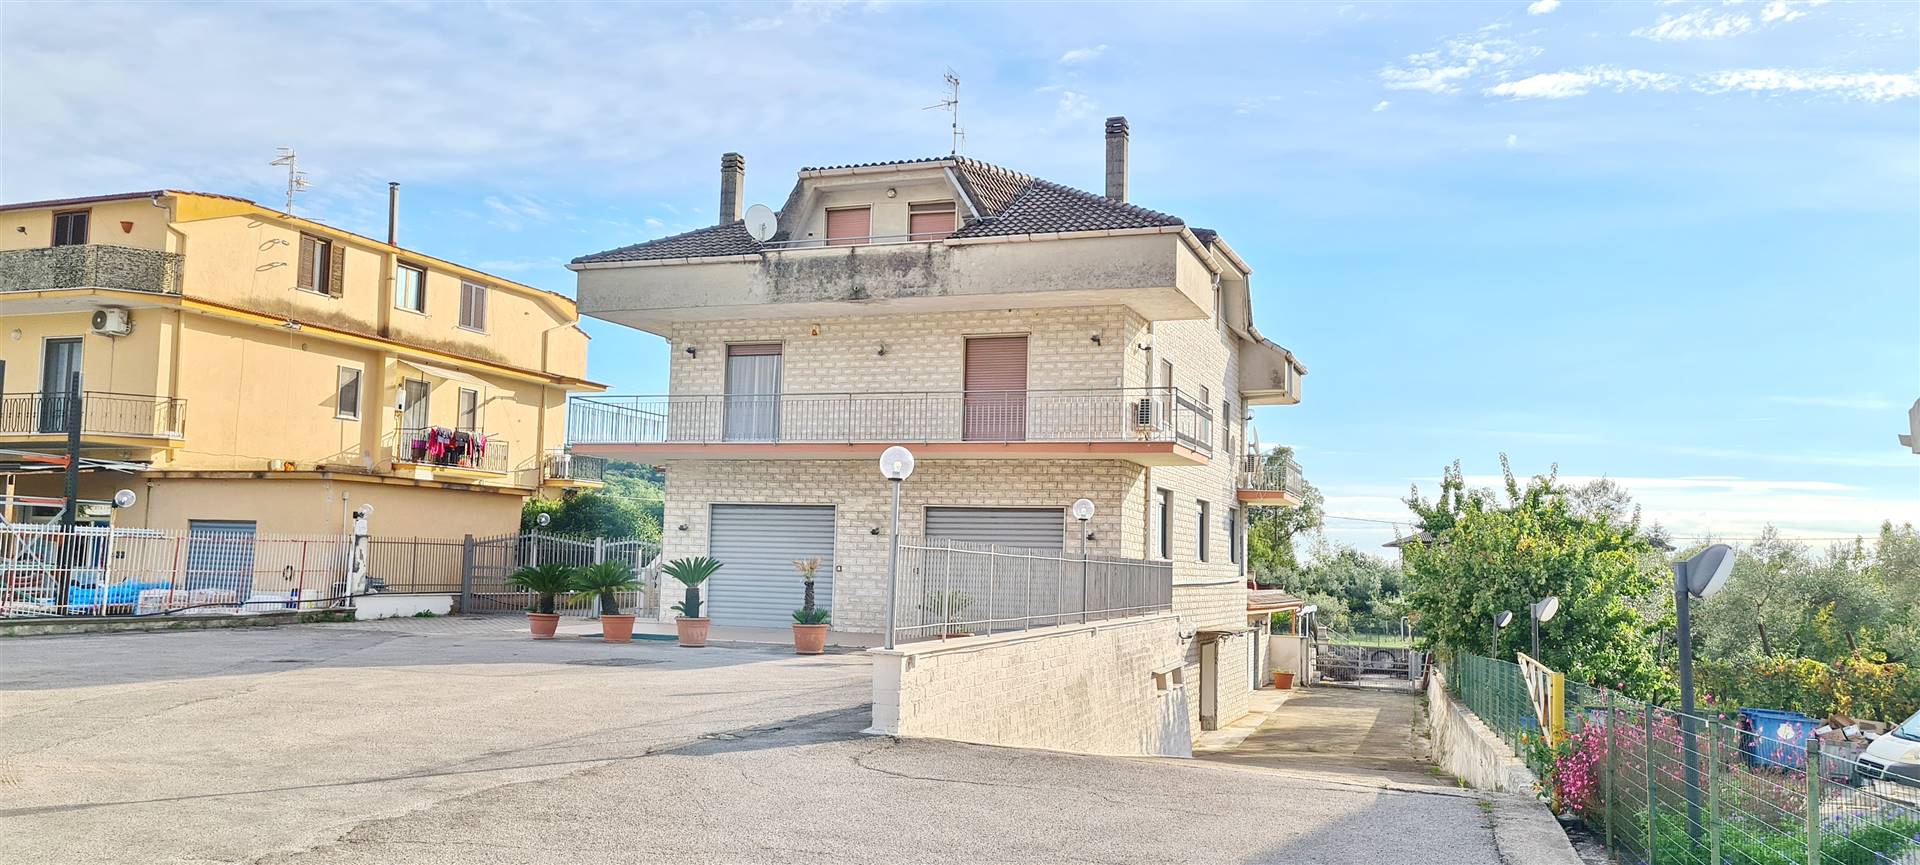 SCAURI, MINTURNO, Apartment for sale, Be restored, Heating Individual heating system, Energetic class: G, placed at 2° on 2, composed by: 4 Rooms, 